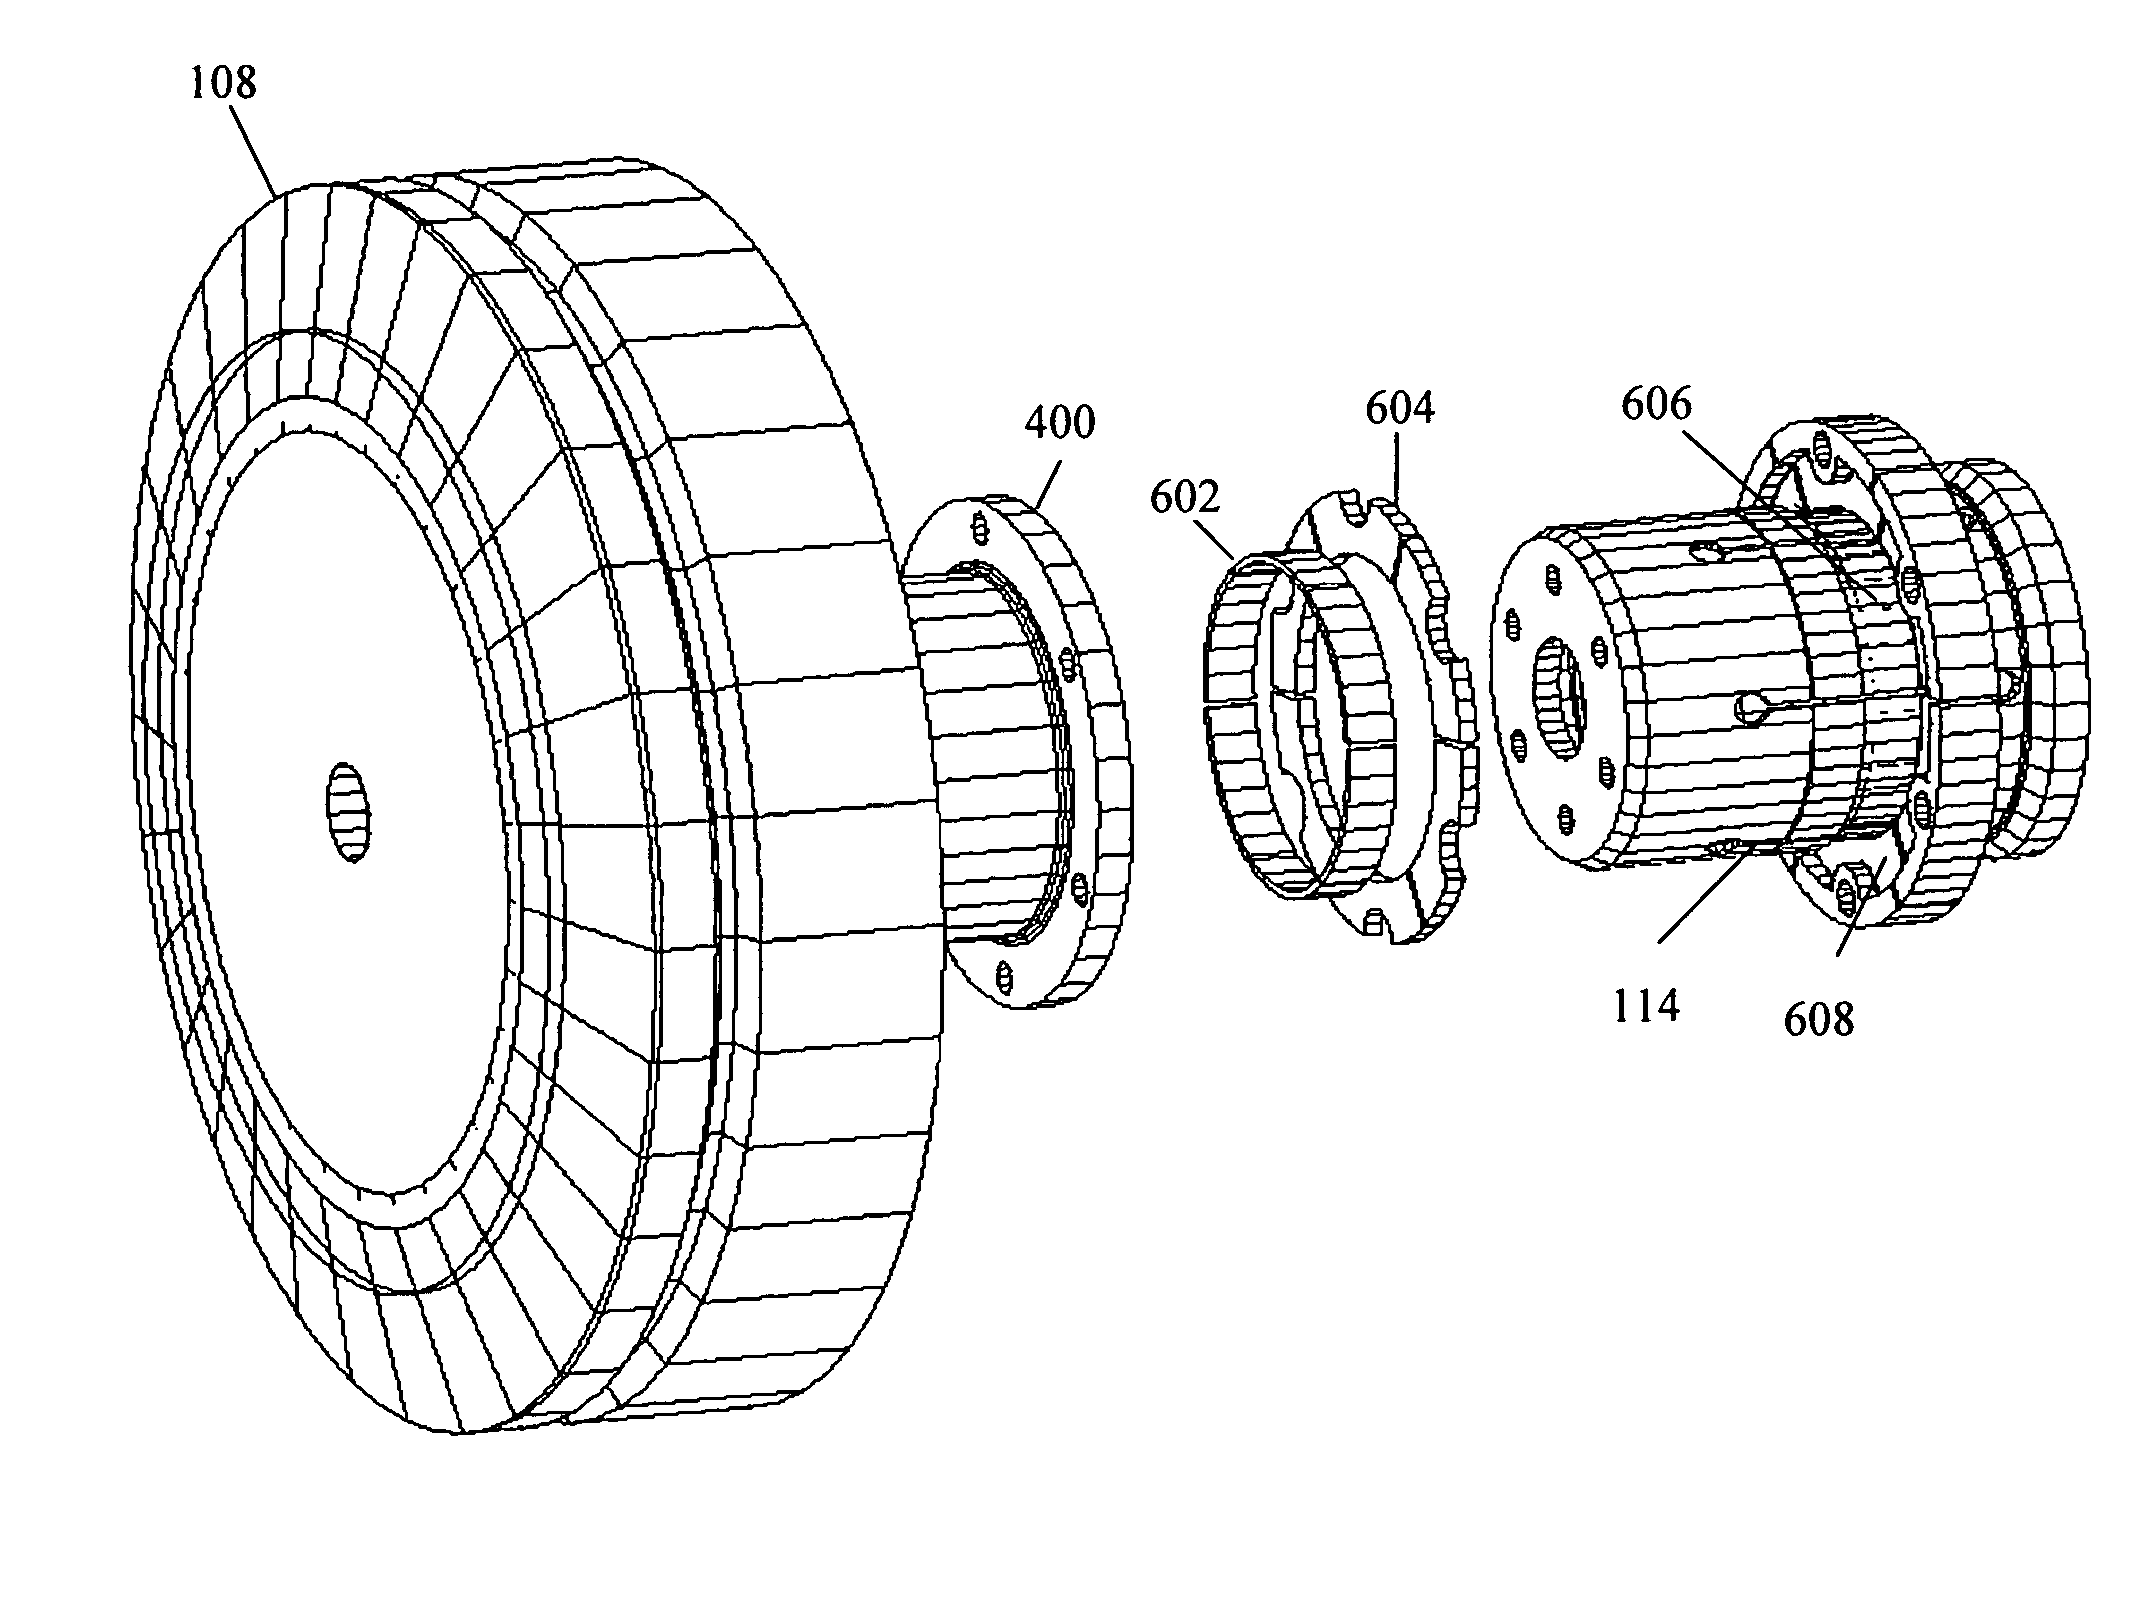 Method and system for thermal control in X-ray imaging tubes